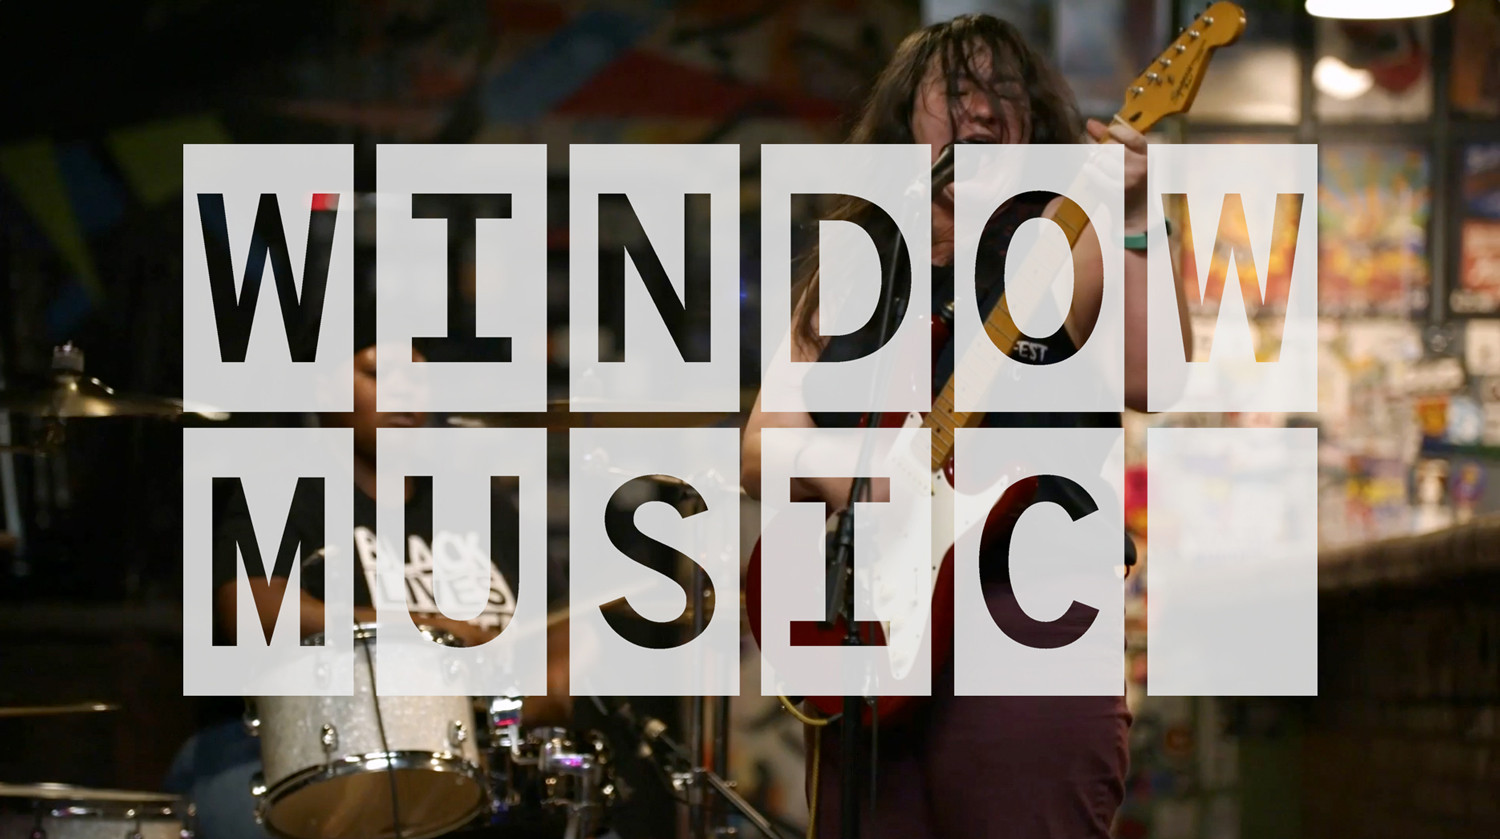 A band is performing in the background of large text that reads ‘Window Music.’